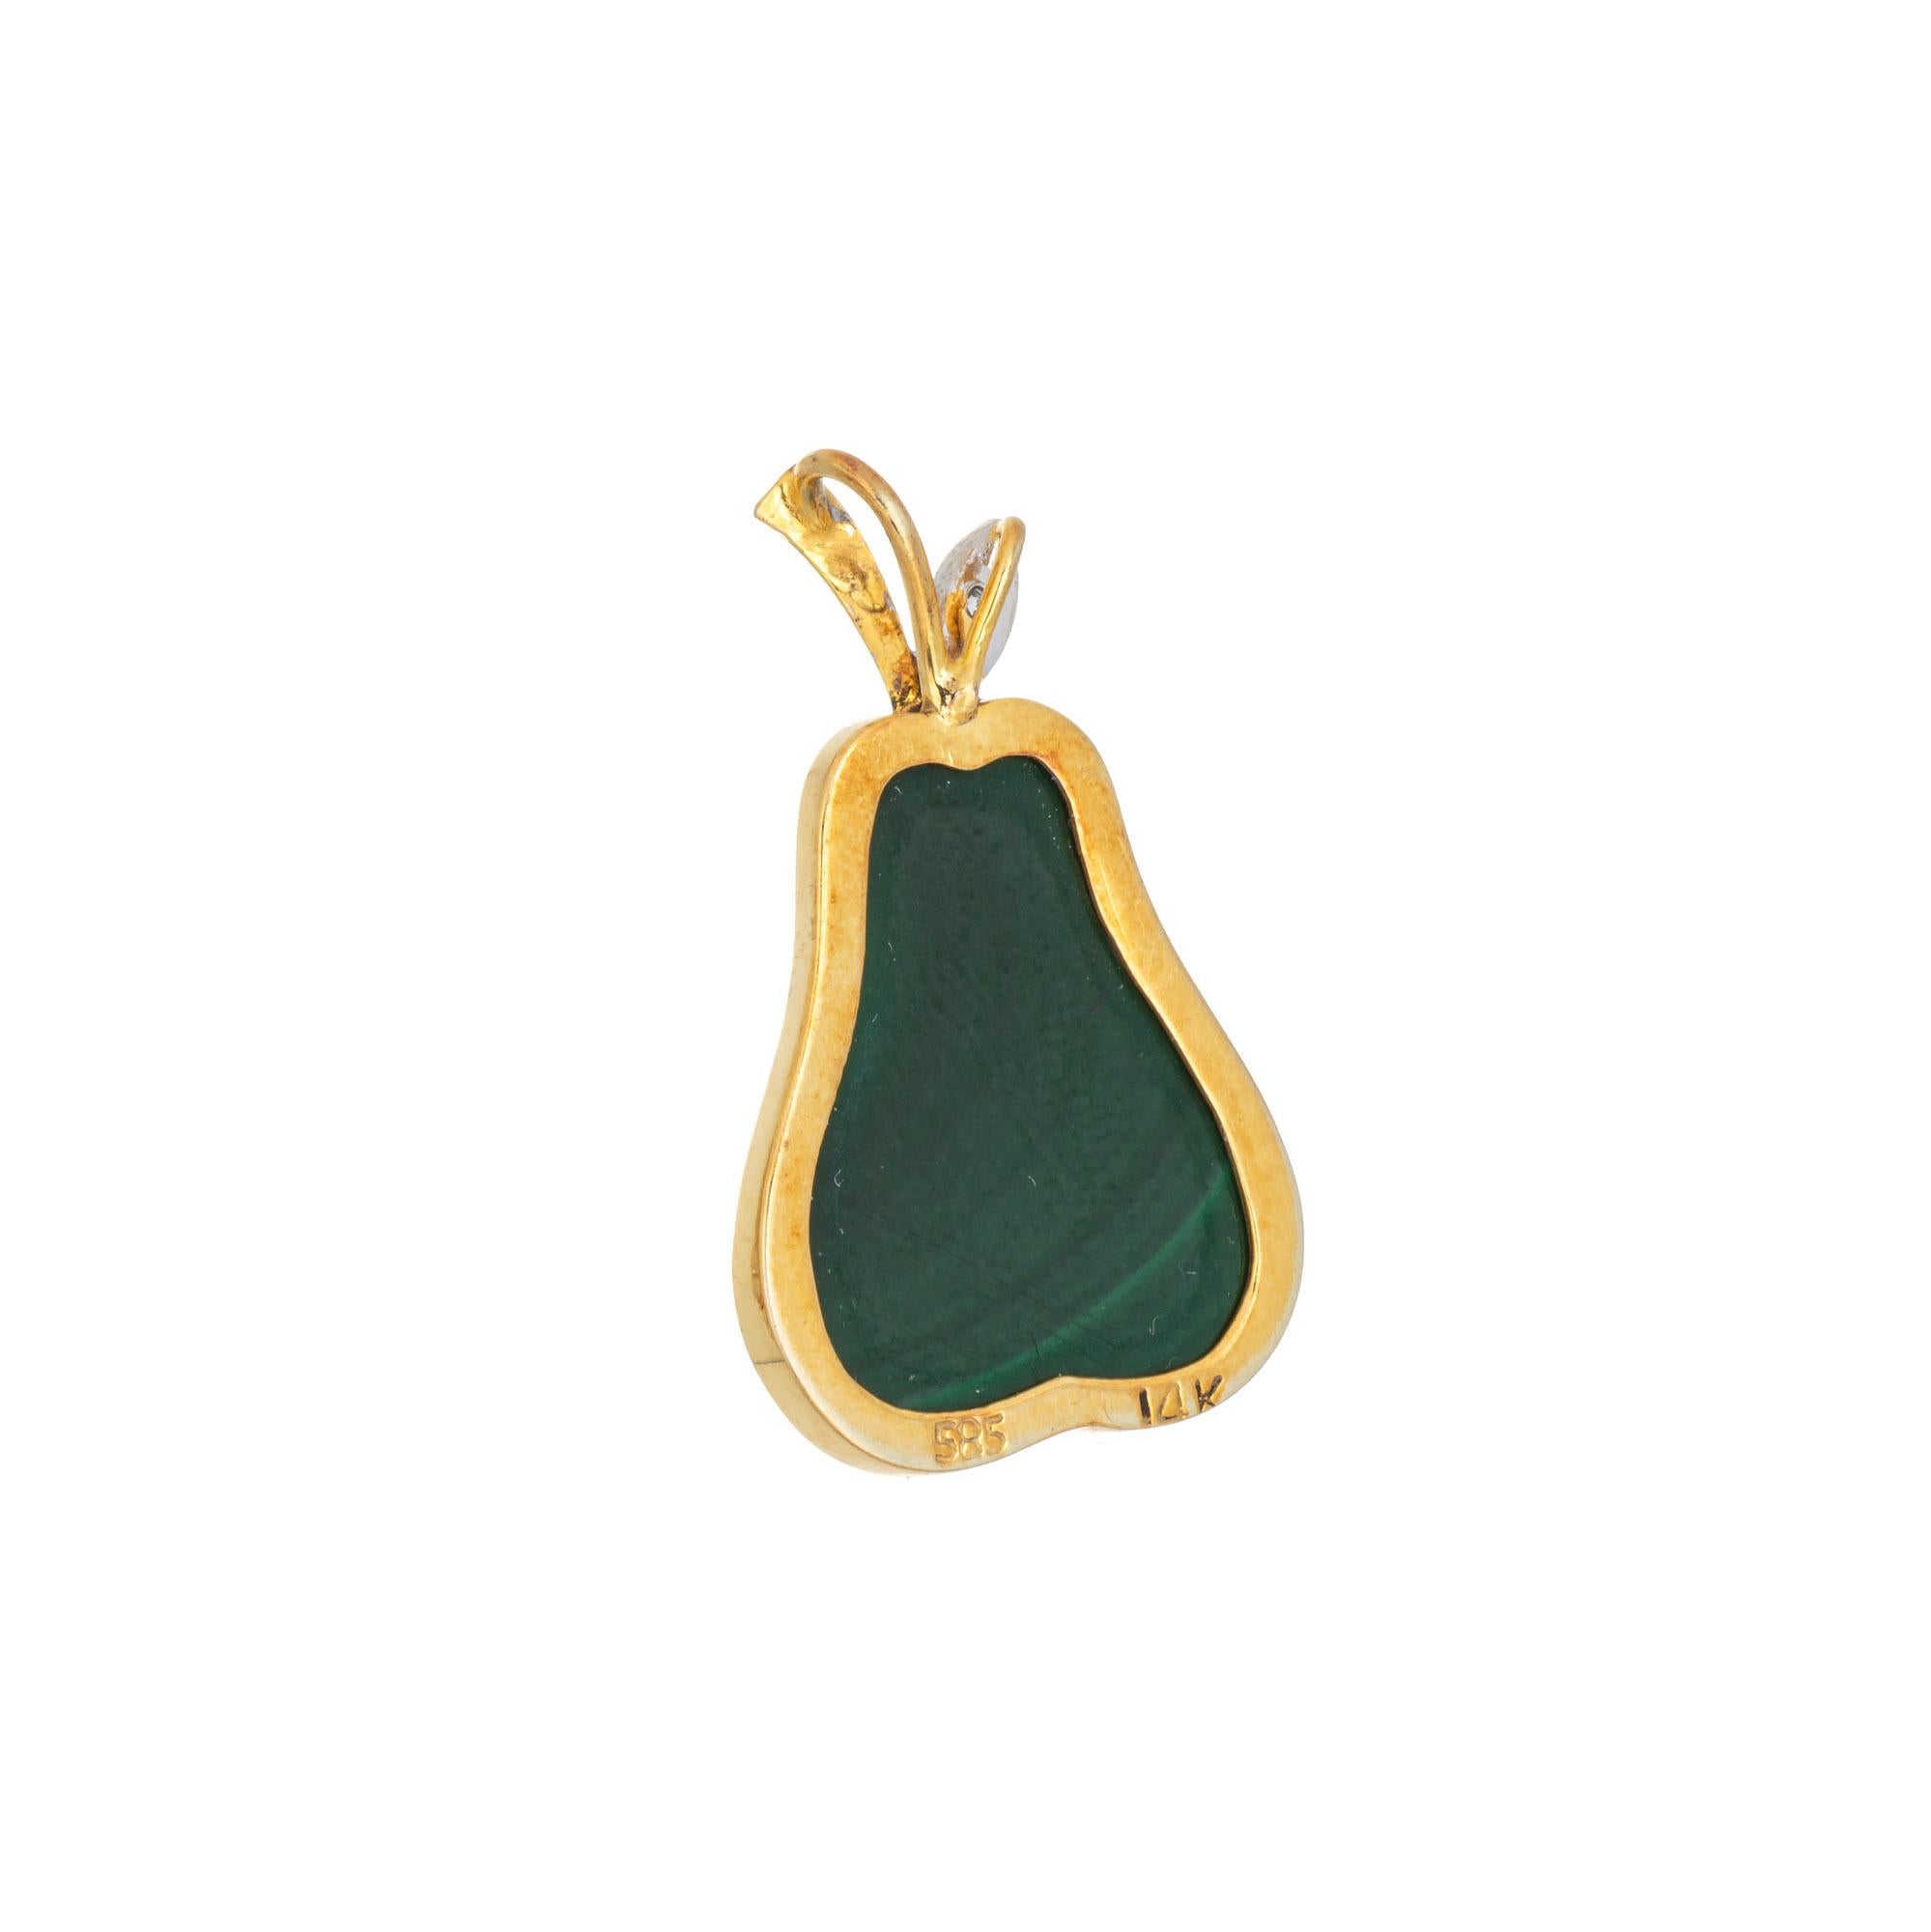 Finely detailed Pear pendant crafted in 14 karat yellow gold (circa 1960s to 1970s). 

Malachite measures 20mm x 12mm. The malachite is in very good condition and free of cracks or chips. One small single cut diamond is estimated at 0.01 carats